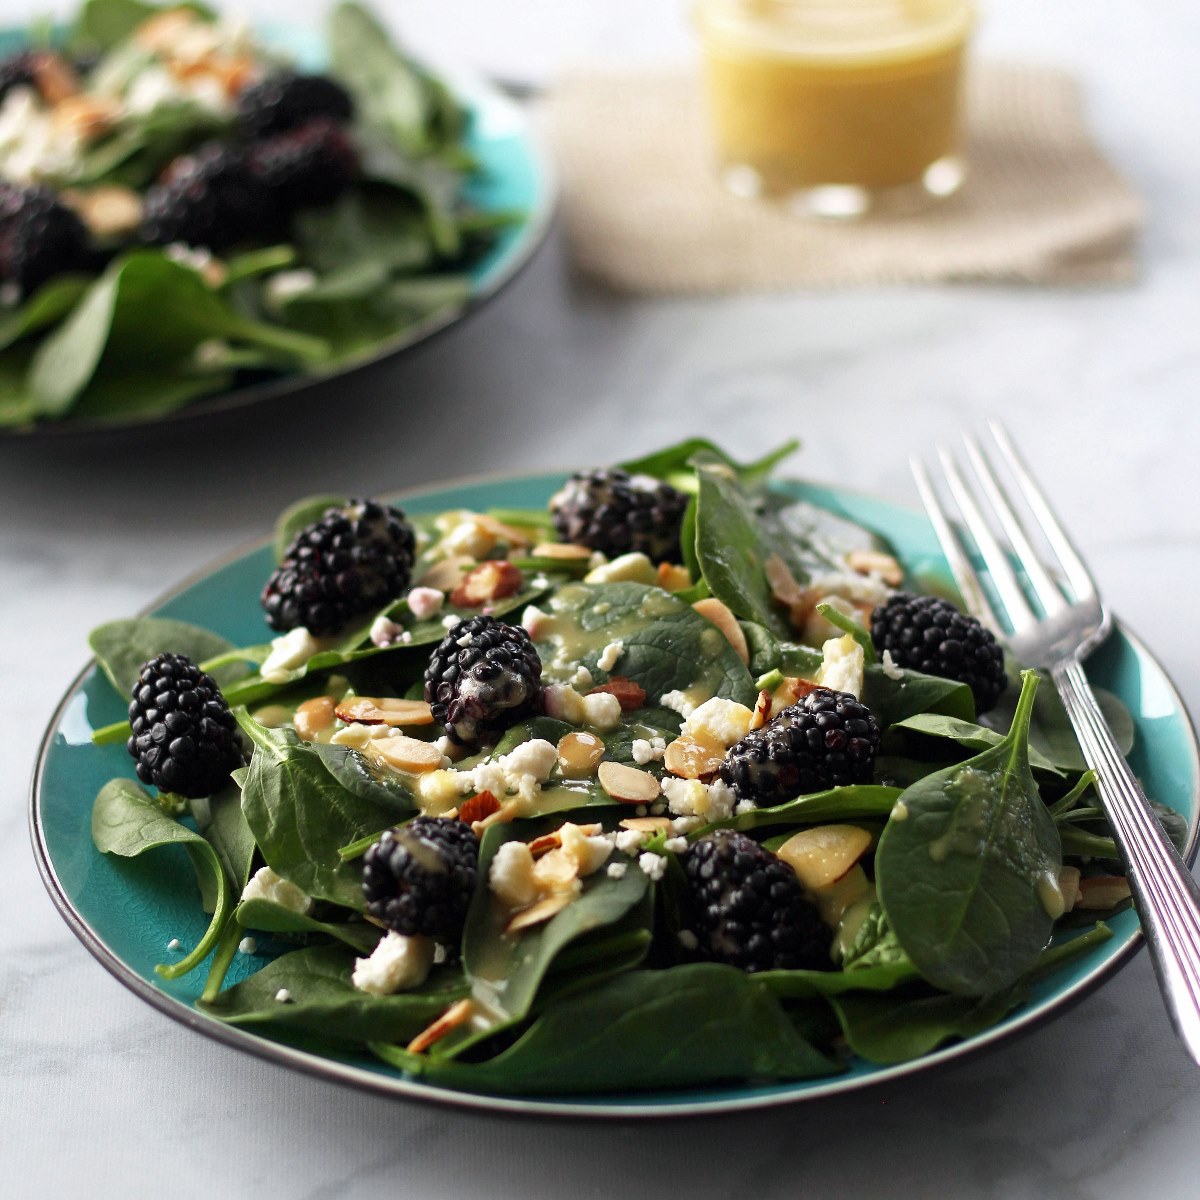 Spinach salad with blackberries, feta cheese, and sliced almonds with dressing on a teal plate and fork. Looking at it from an angle.